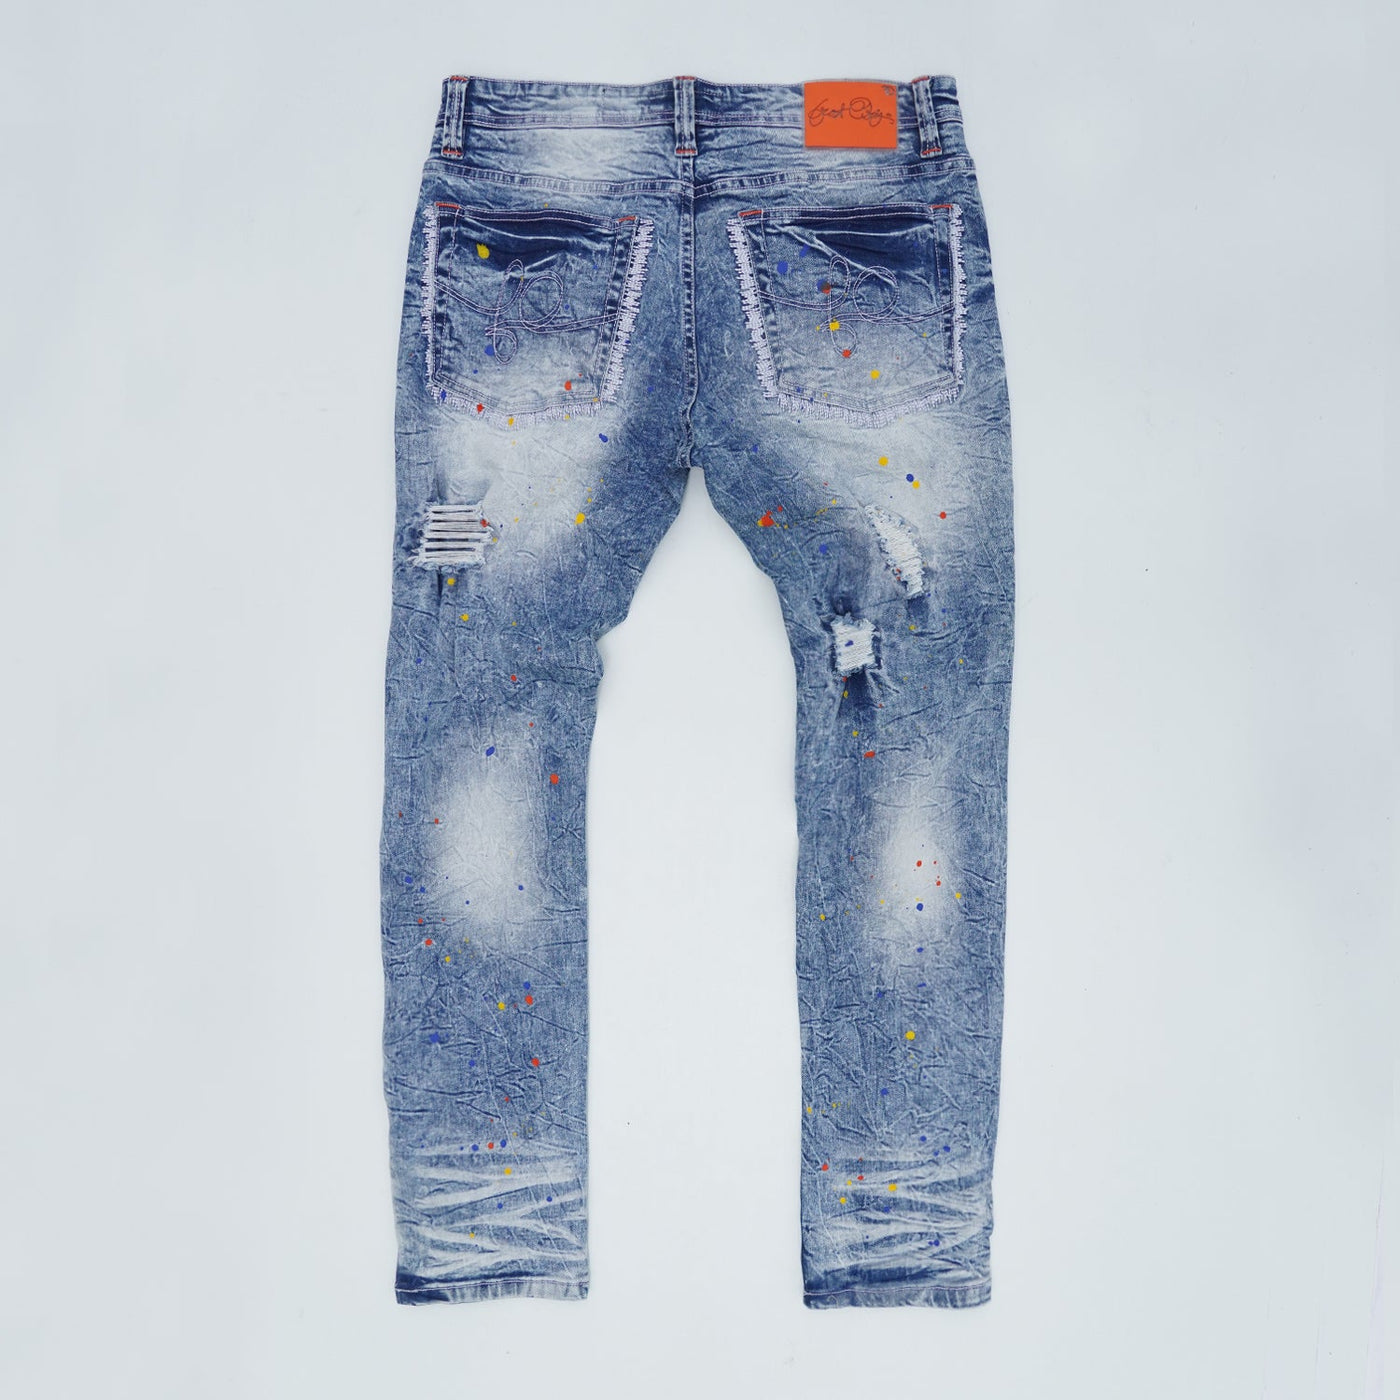 F1778 Frost Shredded Jeans with paint - Light Wash